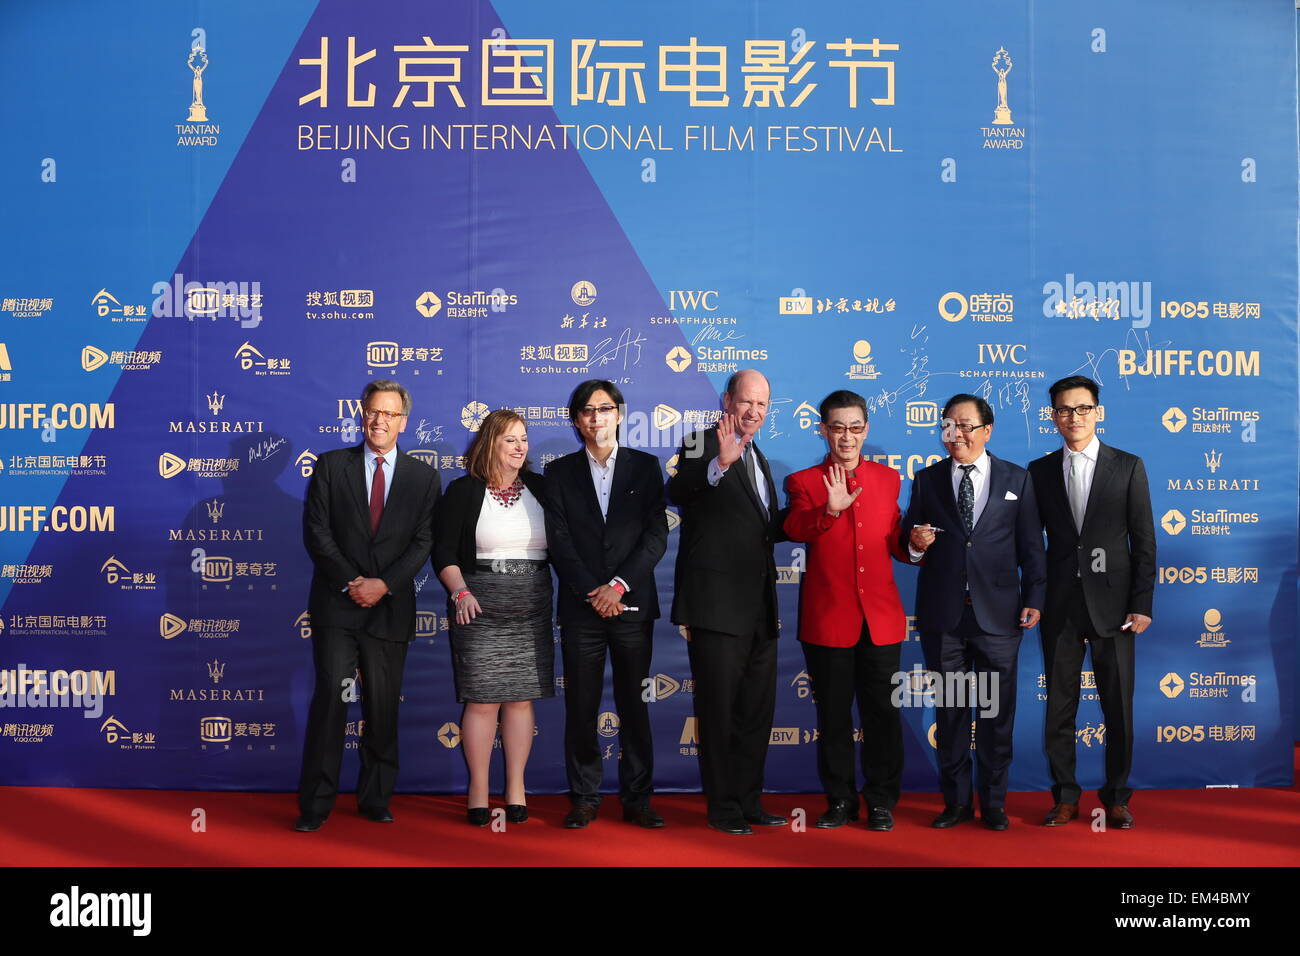 Beijing, China. 16th Apr, 2015. Chinese actor Zhang Jinlai (stage named Liuxiao Lingtong, 3rd R), Ma Dehua (2nd R) and other crew members of the movie 'Journey To the West' walk the red carpet during the opening ceremony of the fifth Beijing International Film Festival (BJIFF) in Beijing, capital of China, April 16, 2015. The BJIFF kicks off Thursday and will last until April 23. © Xing Guangli/Xinhua/Alamy Live News Stock Photo